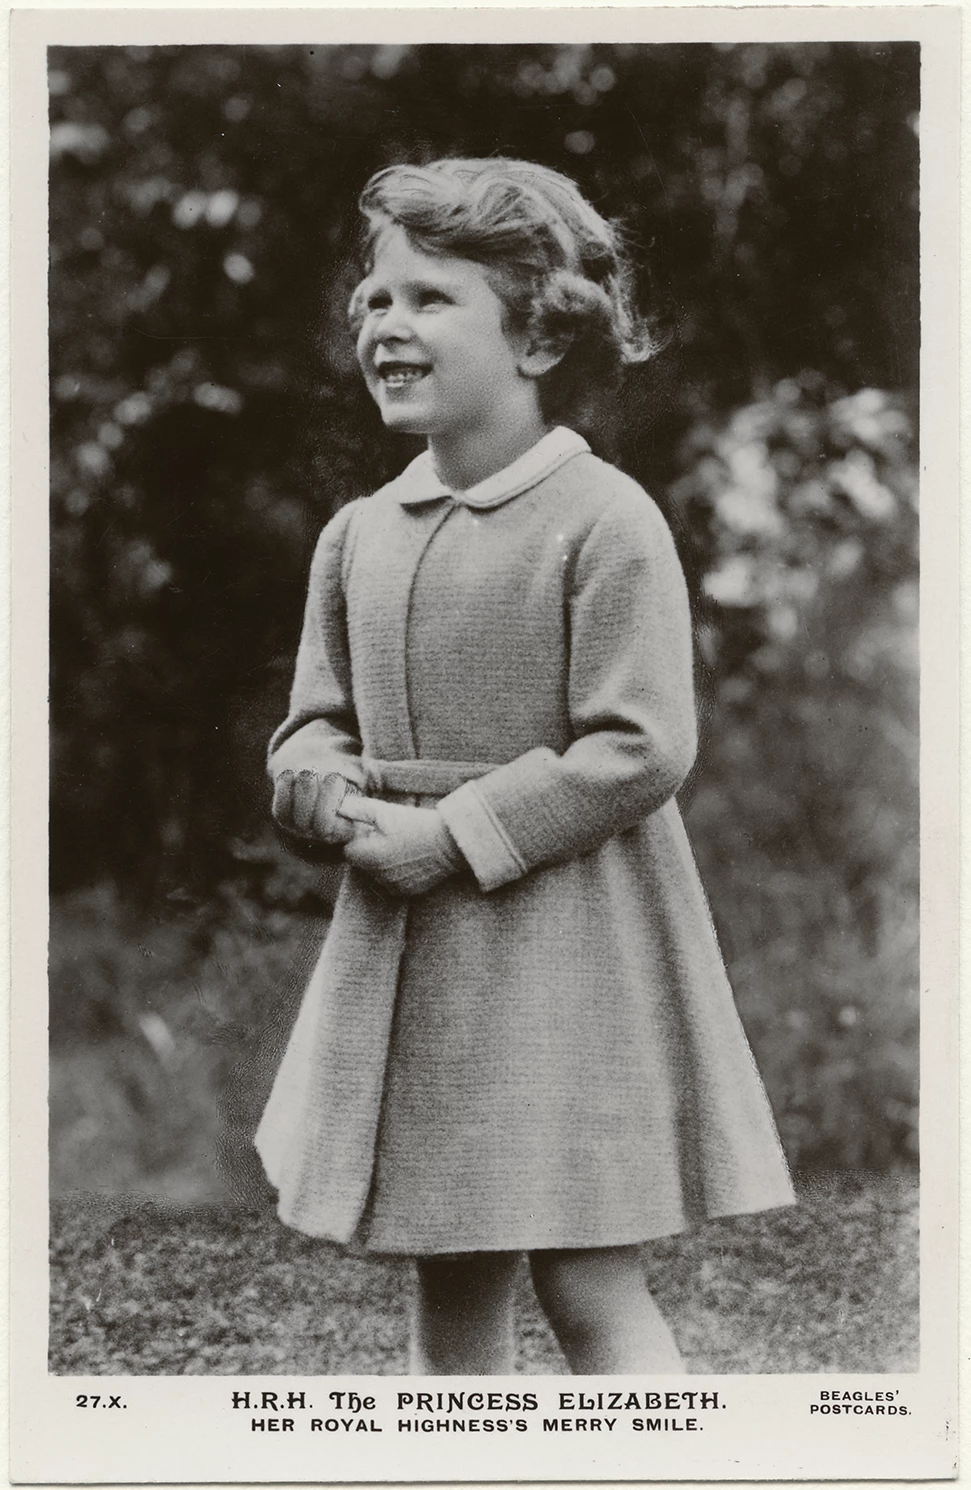 Platinum Jubilee: Discover the most iconic images of The Queen through the years 6. H.R.H. The Princess Elizabeth. Her Royal Highnesss Merry Smile